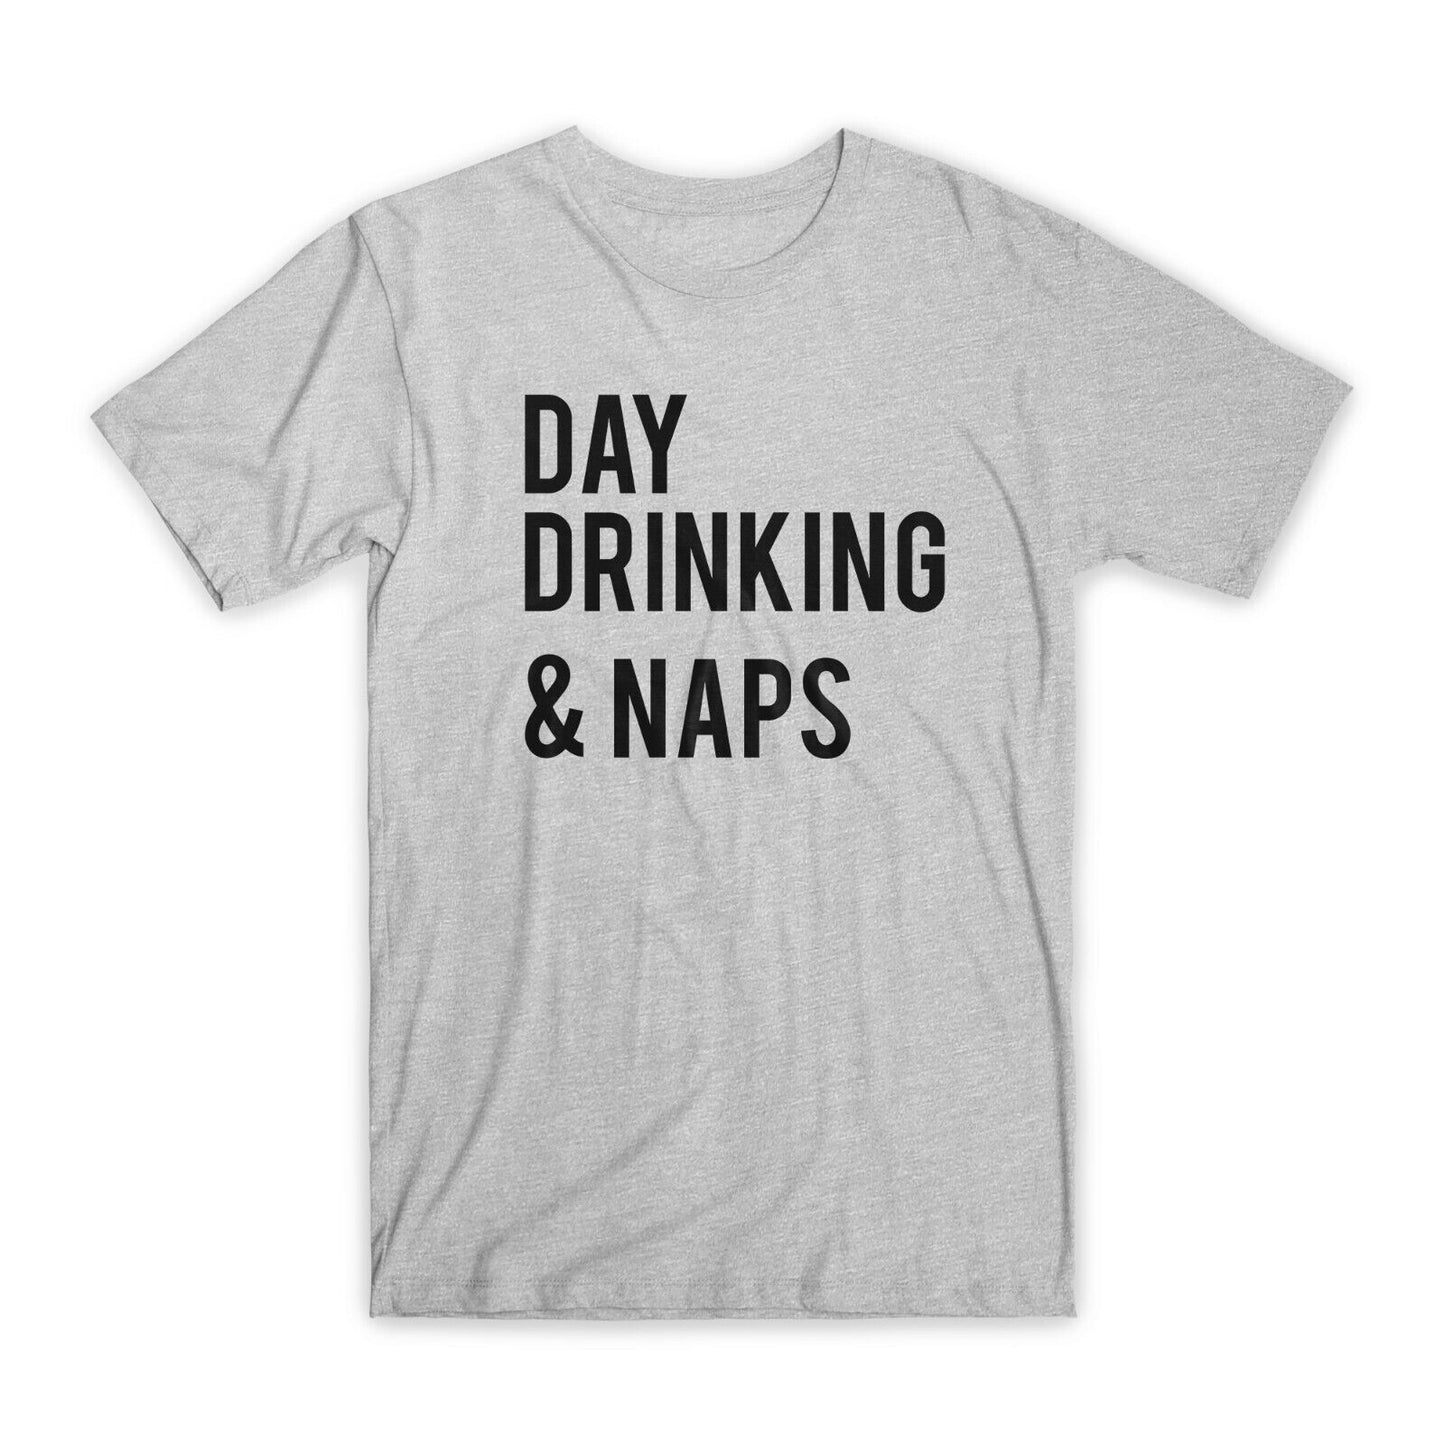 Day Drinking & Naps T-Shirt Premium Soft Cotton Crew Neck Funny Tees Gifts NEW